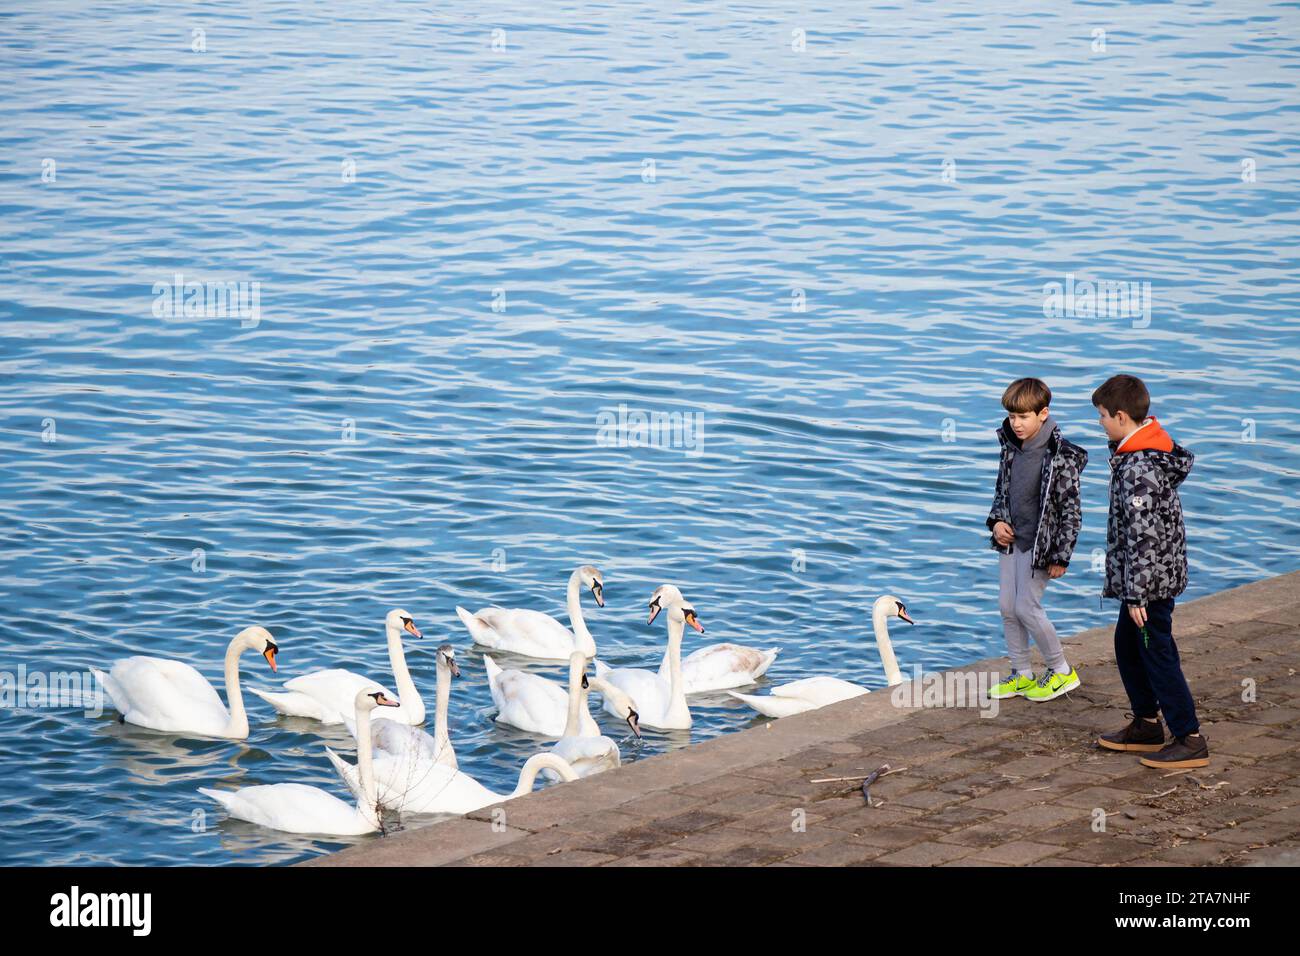 Belgrade, Serbia - December 02, 2020: Two boys feeding swans from the river bank promenade, on sunny winter day Stock Photo